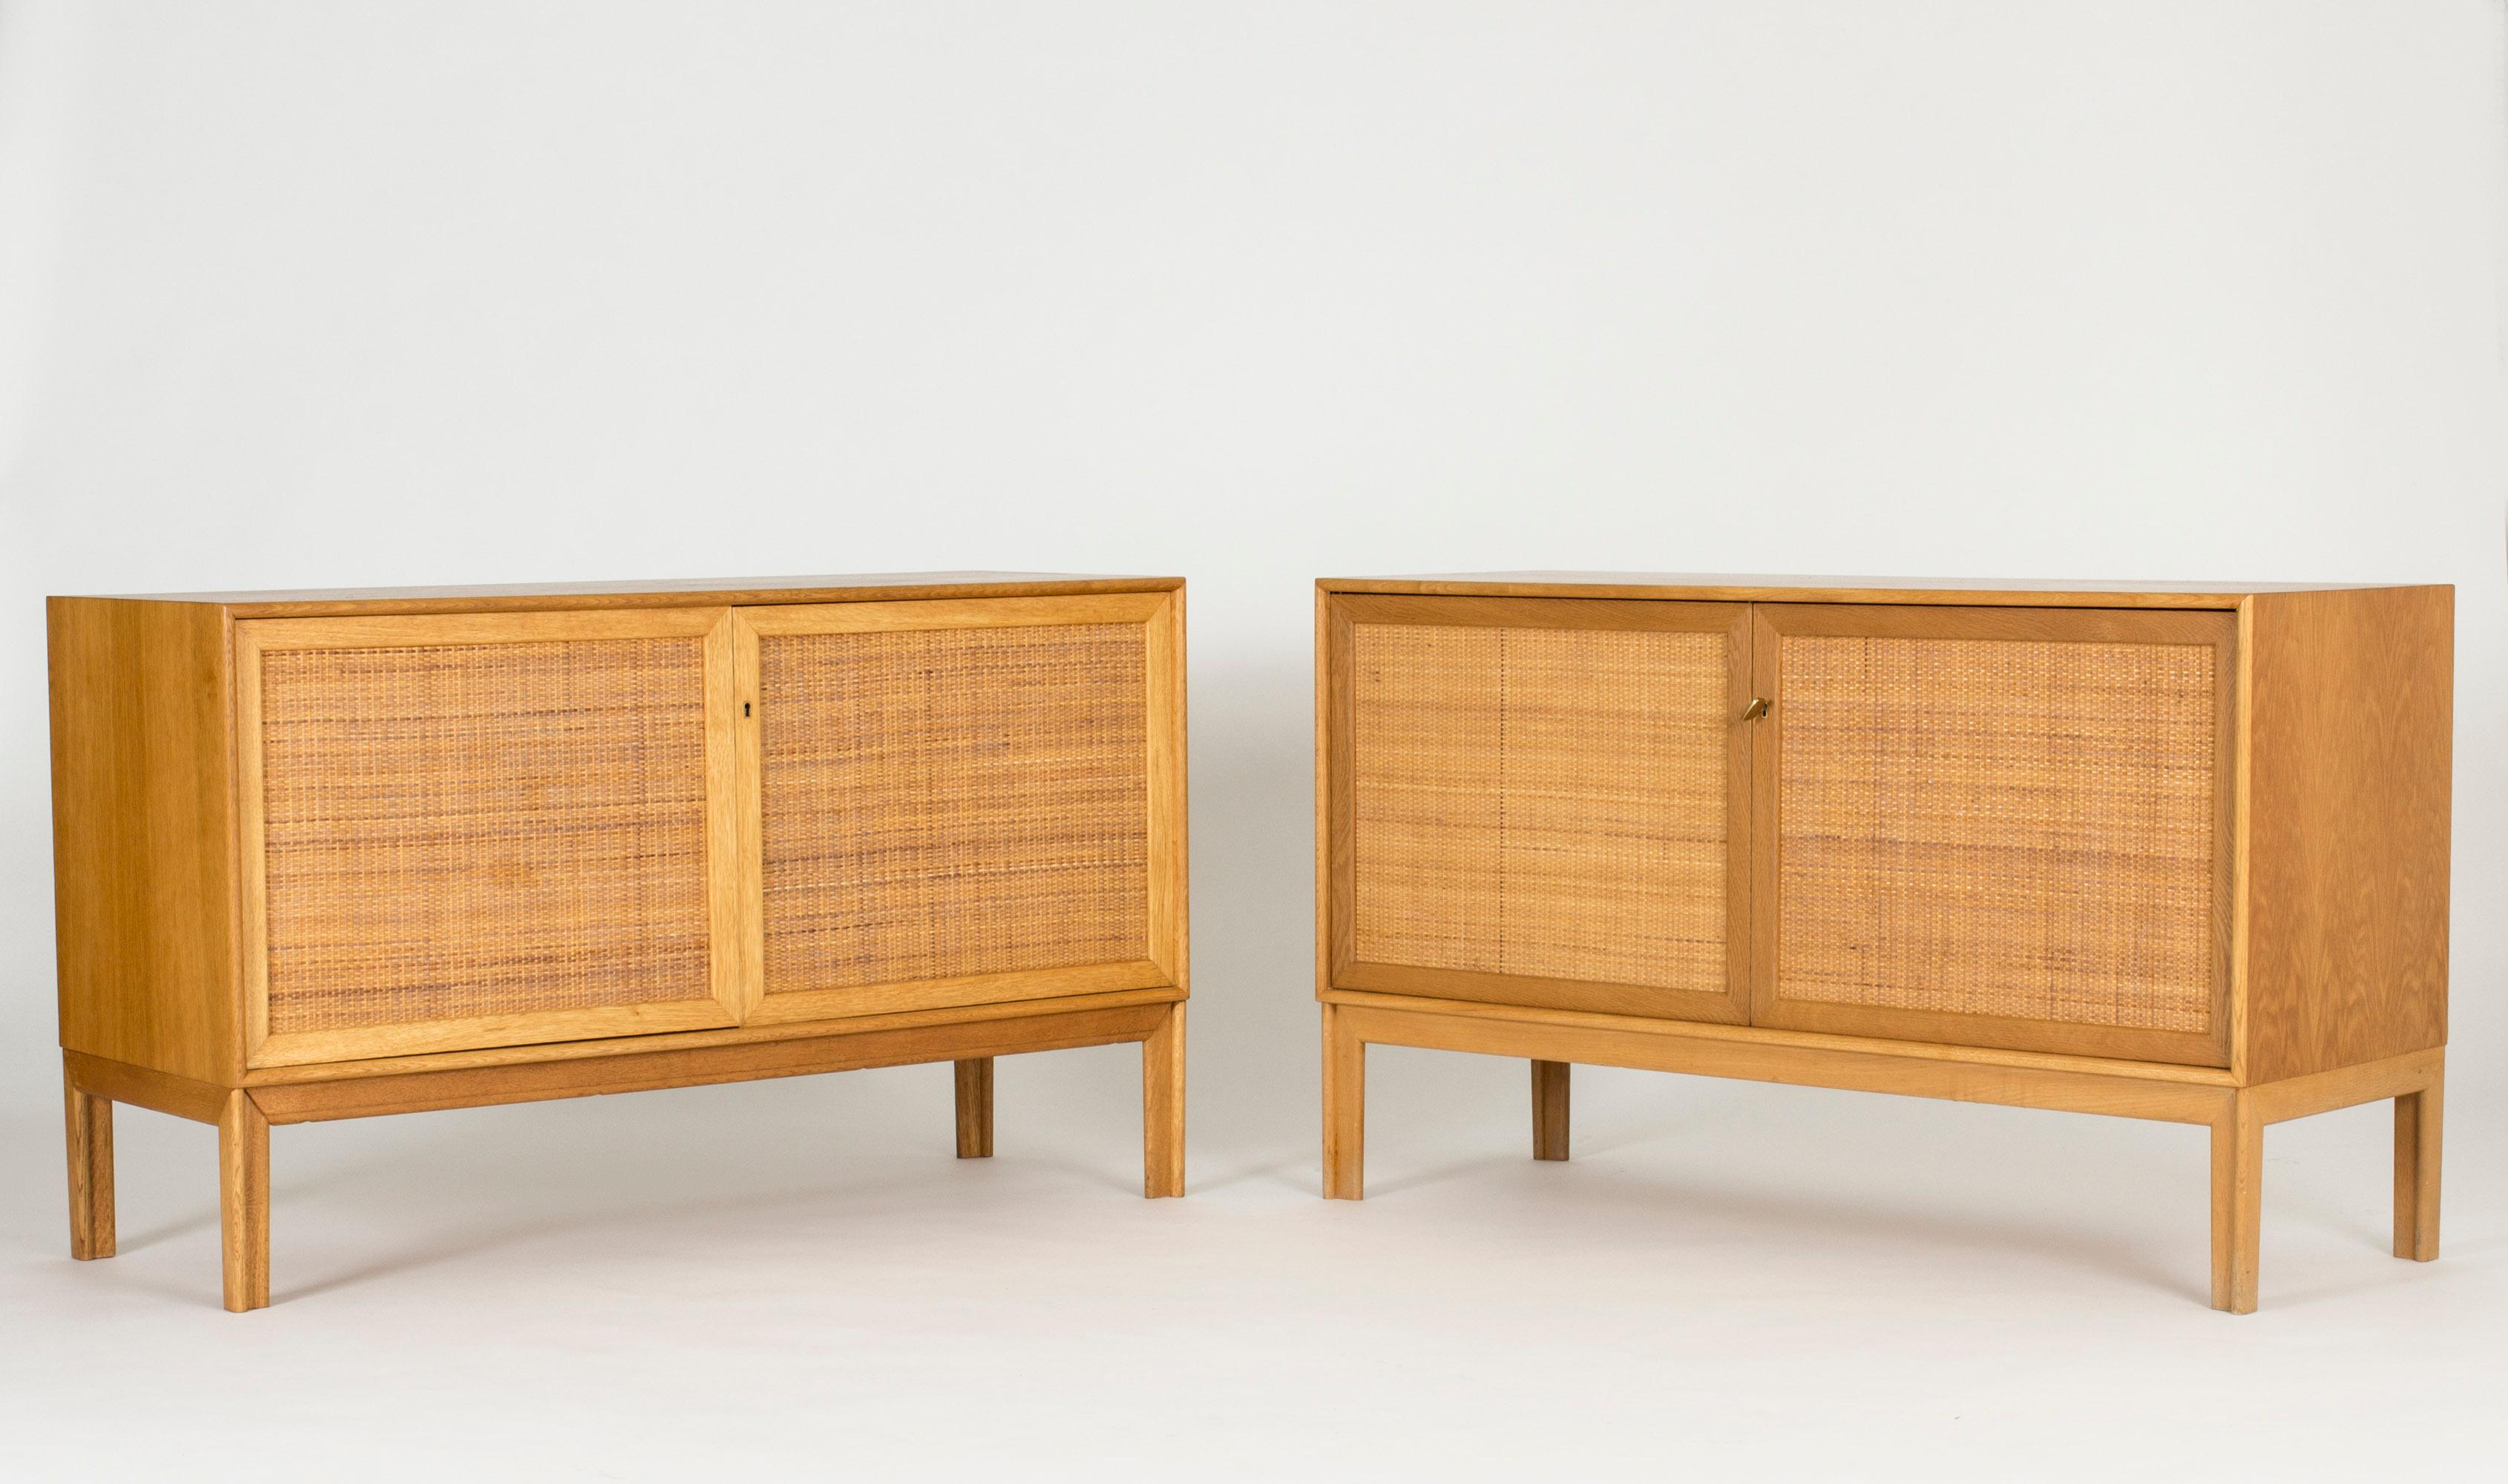 Pair of oak sideboards with beautiful rattan fronts, designed by Alf Svensson for Bjästa. Two shelves inside each sideboard separated by a wall in the center. Cool, large brass keys and nicely sculpted legs. Some variation in the color of the wood